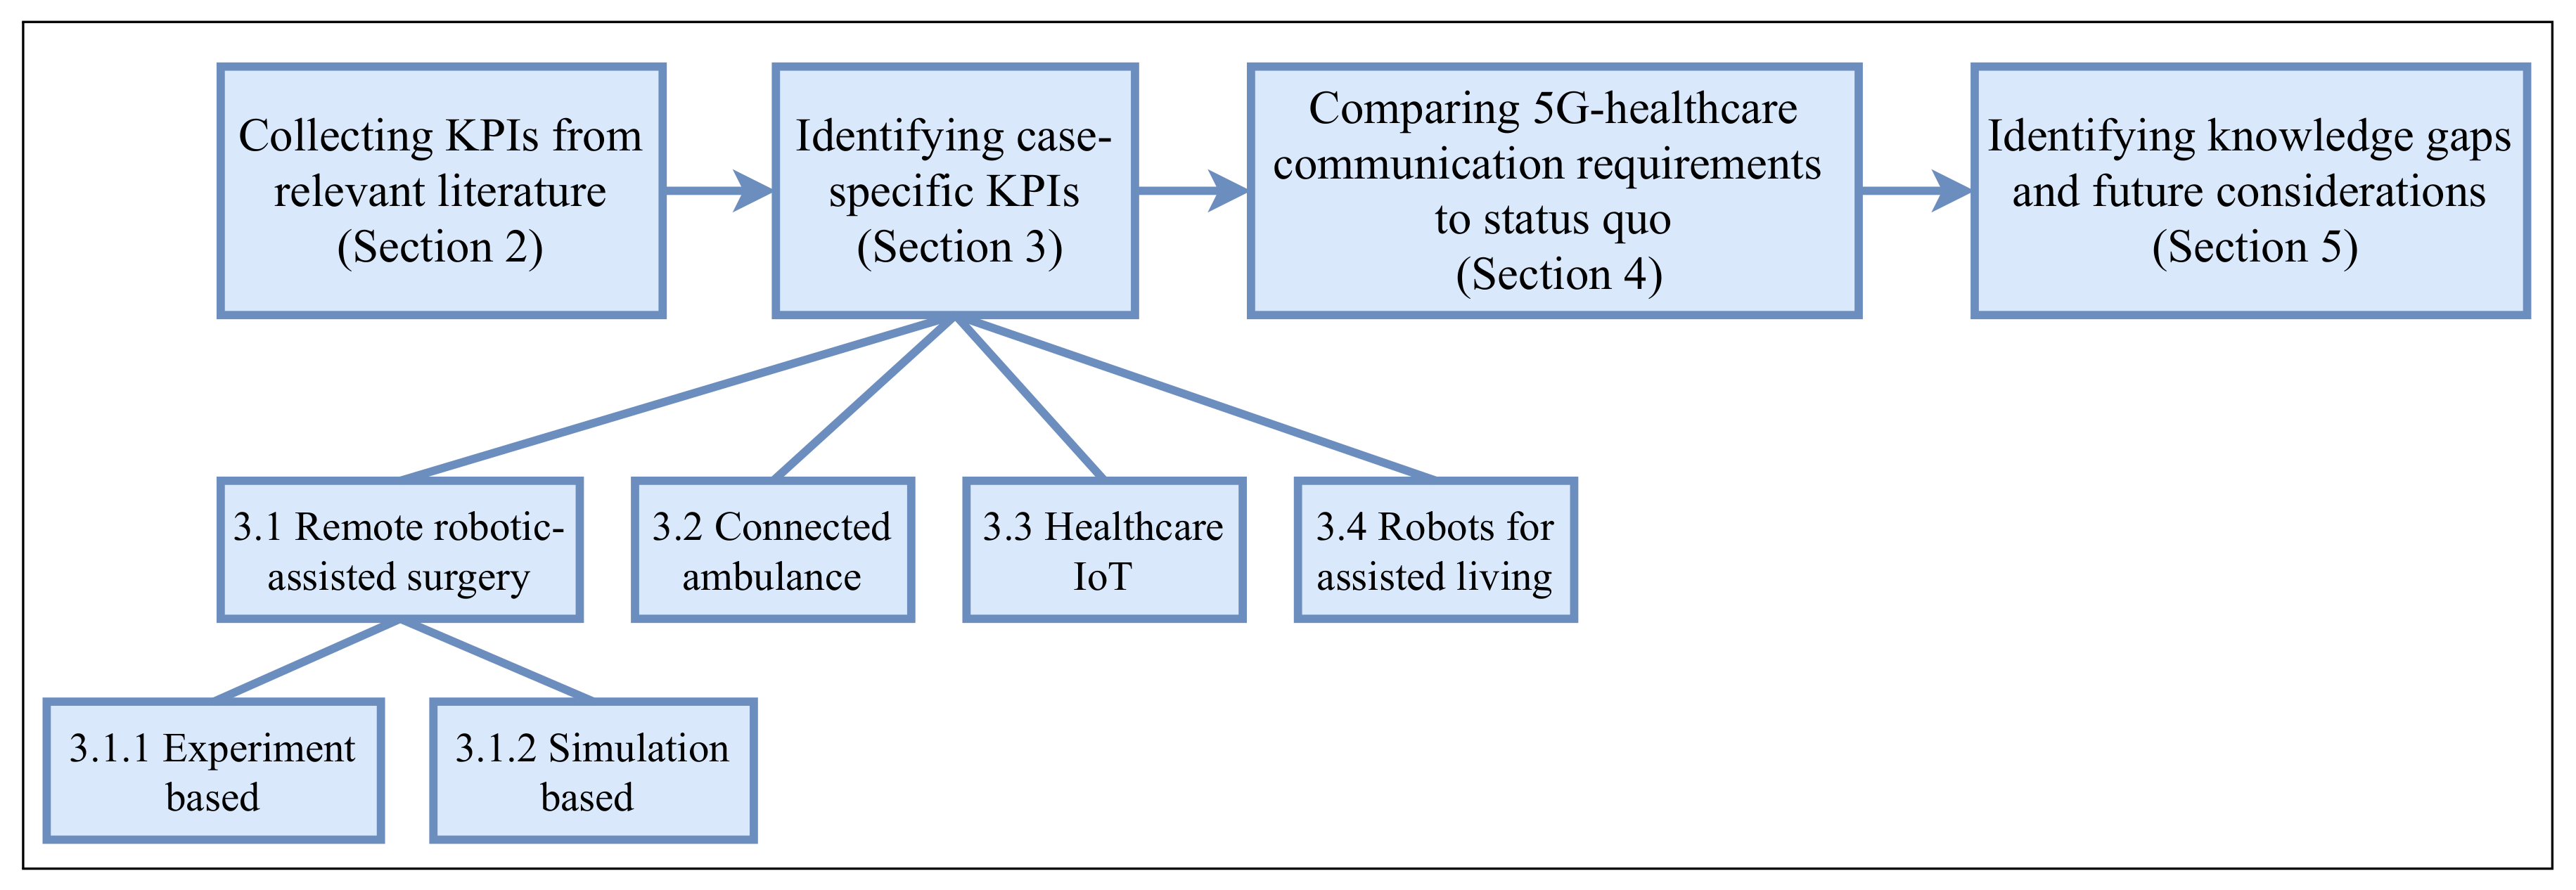 Healthcare Free Full-Text Communication Requirements in 5G-Enabled Healthcare Applications Review and Considerations